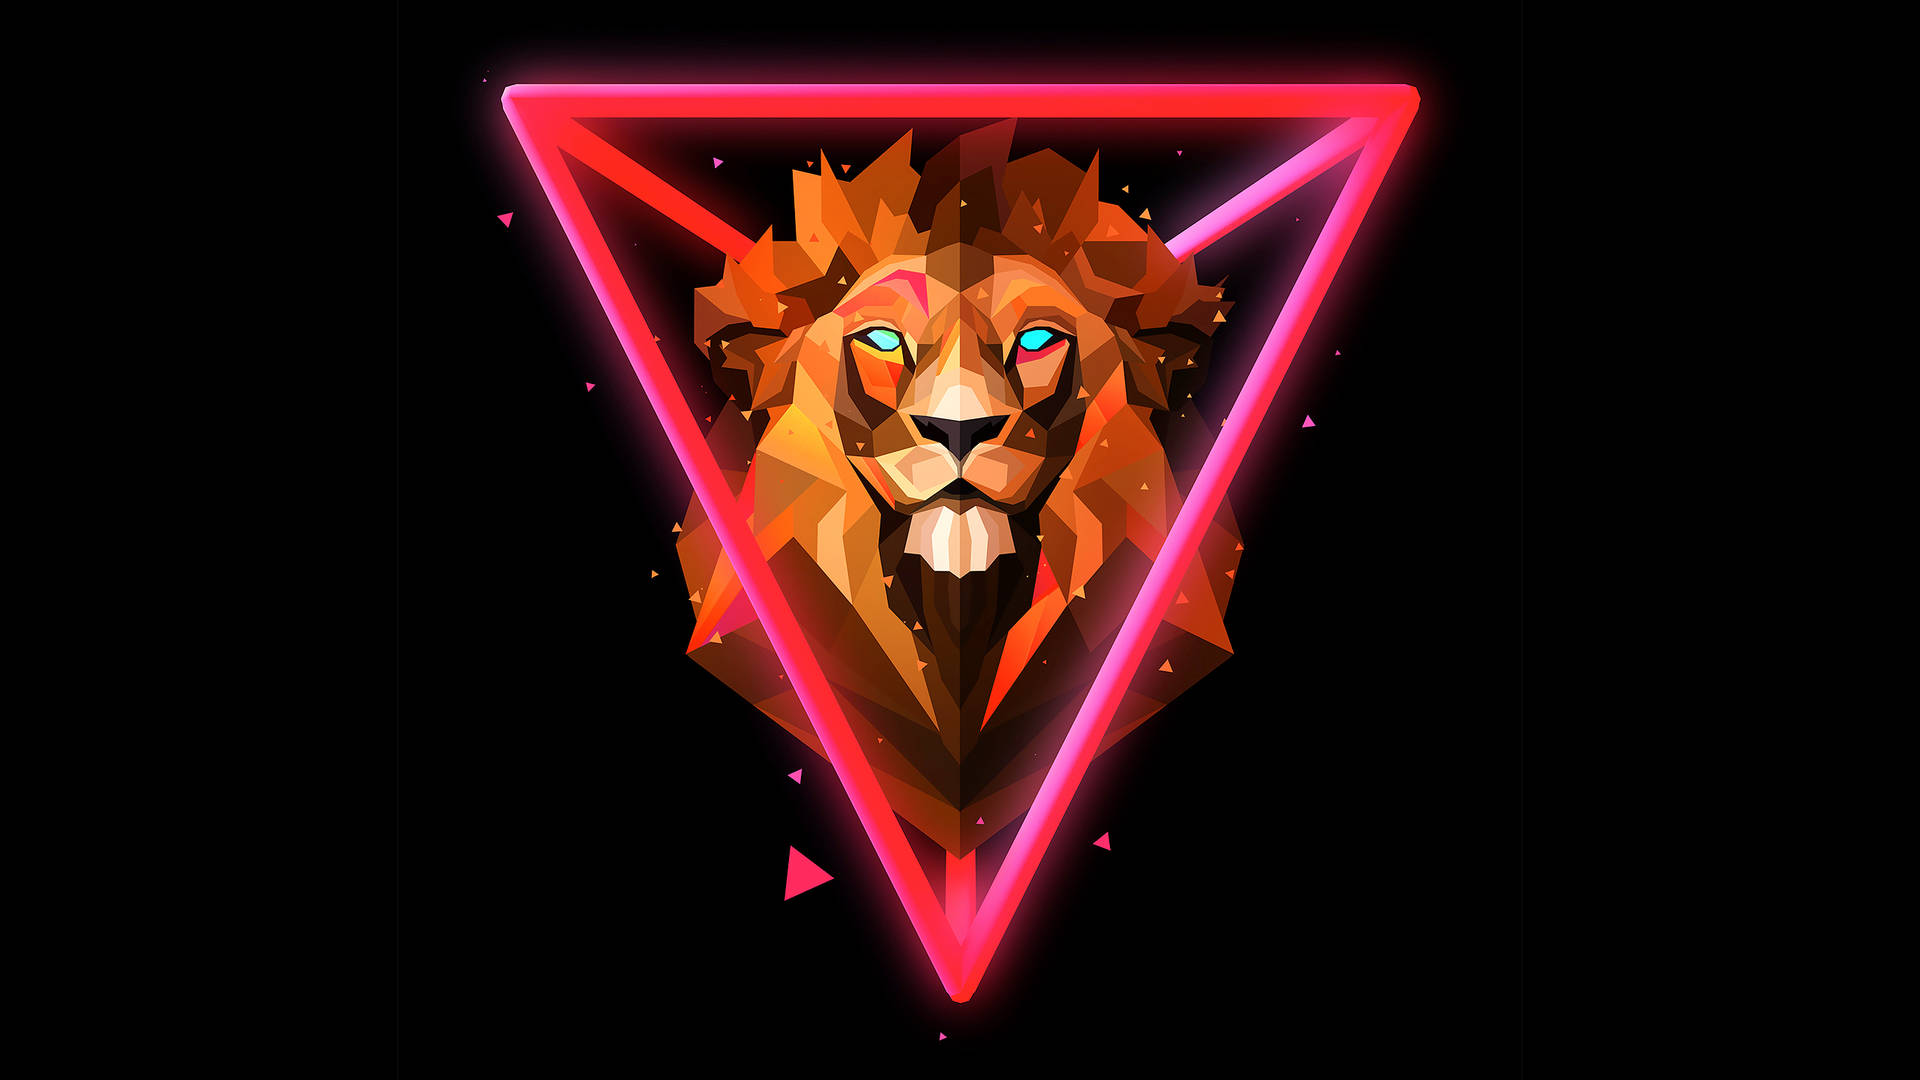 Polygon Art Red Lion Background